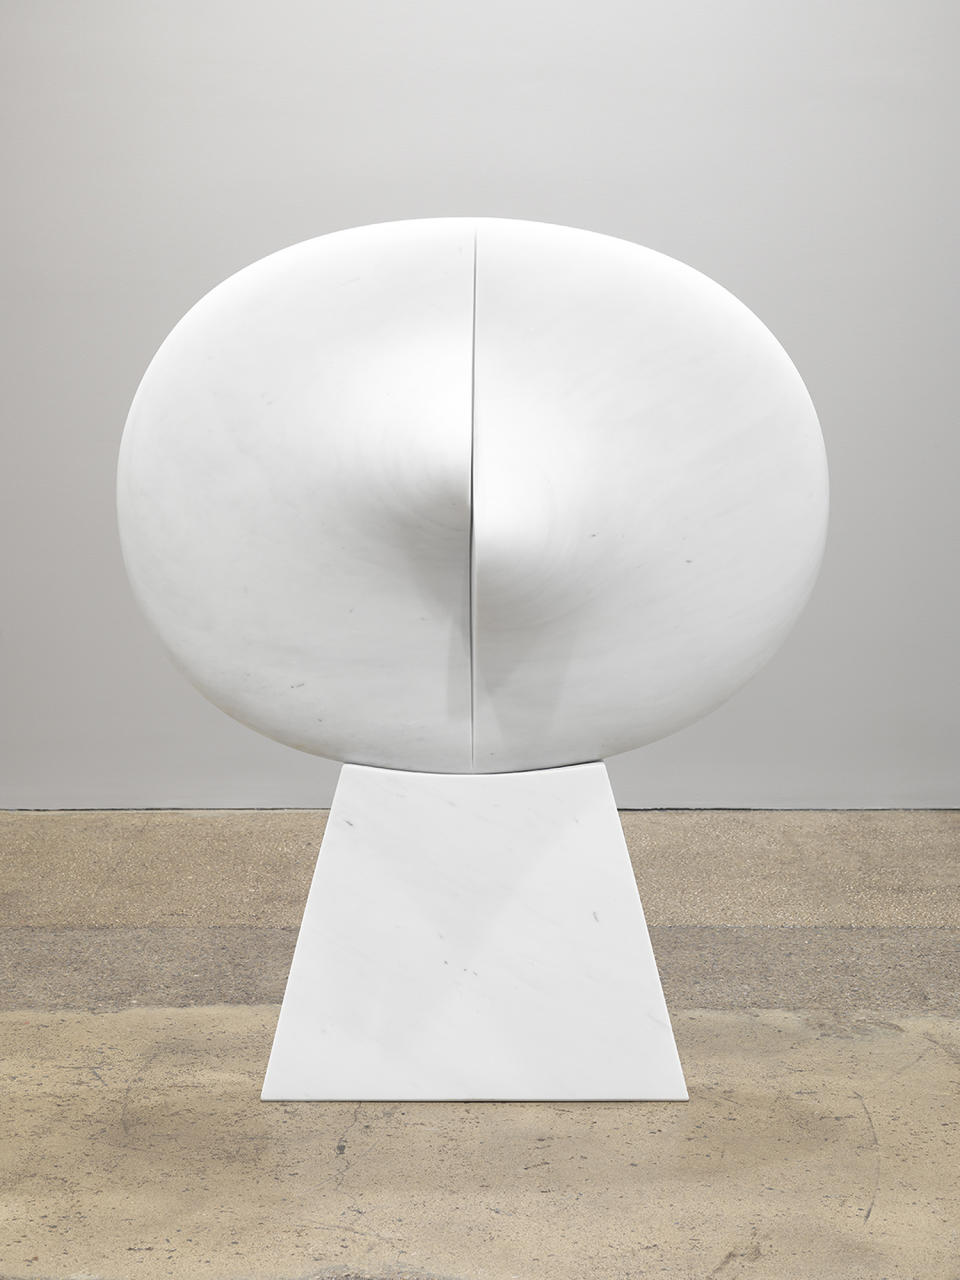 Zilia Sánchez; <em>Lunar Blanco</em>, 2019, conceived 2000; Marble; 58.5 x 48.75 x 19.75 in; © Zilia Sánchez; Courtesy of the artist and Galerie Lelong & Co., New York.